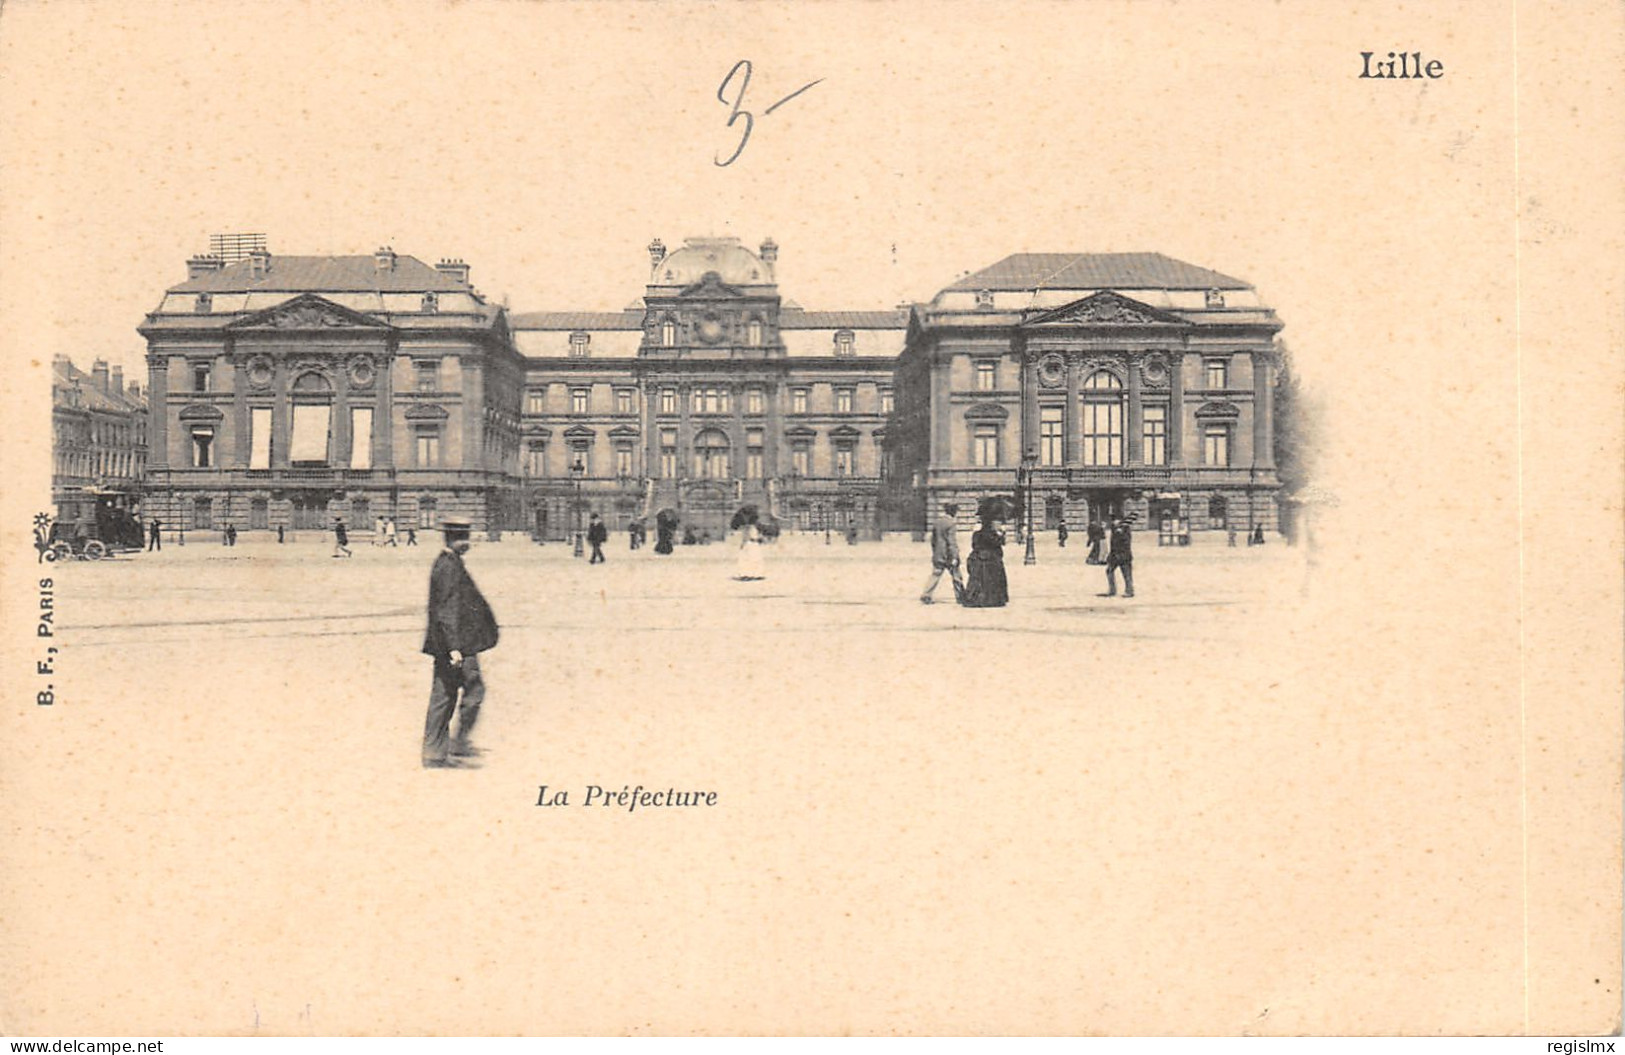 59-LILLE-N°2163-C/0345 - Lille